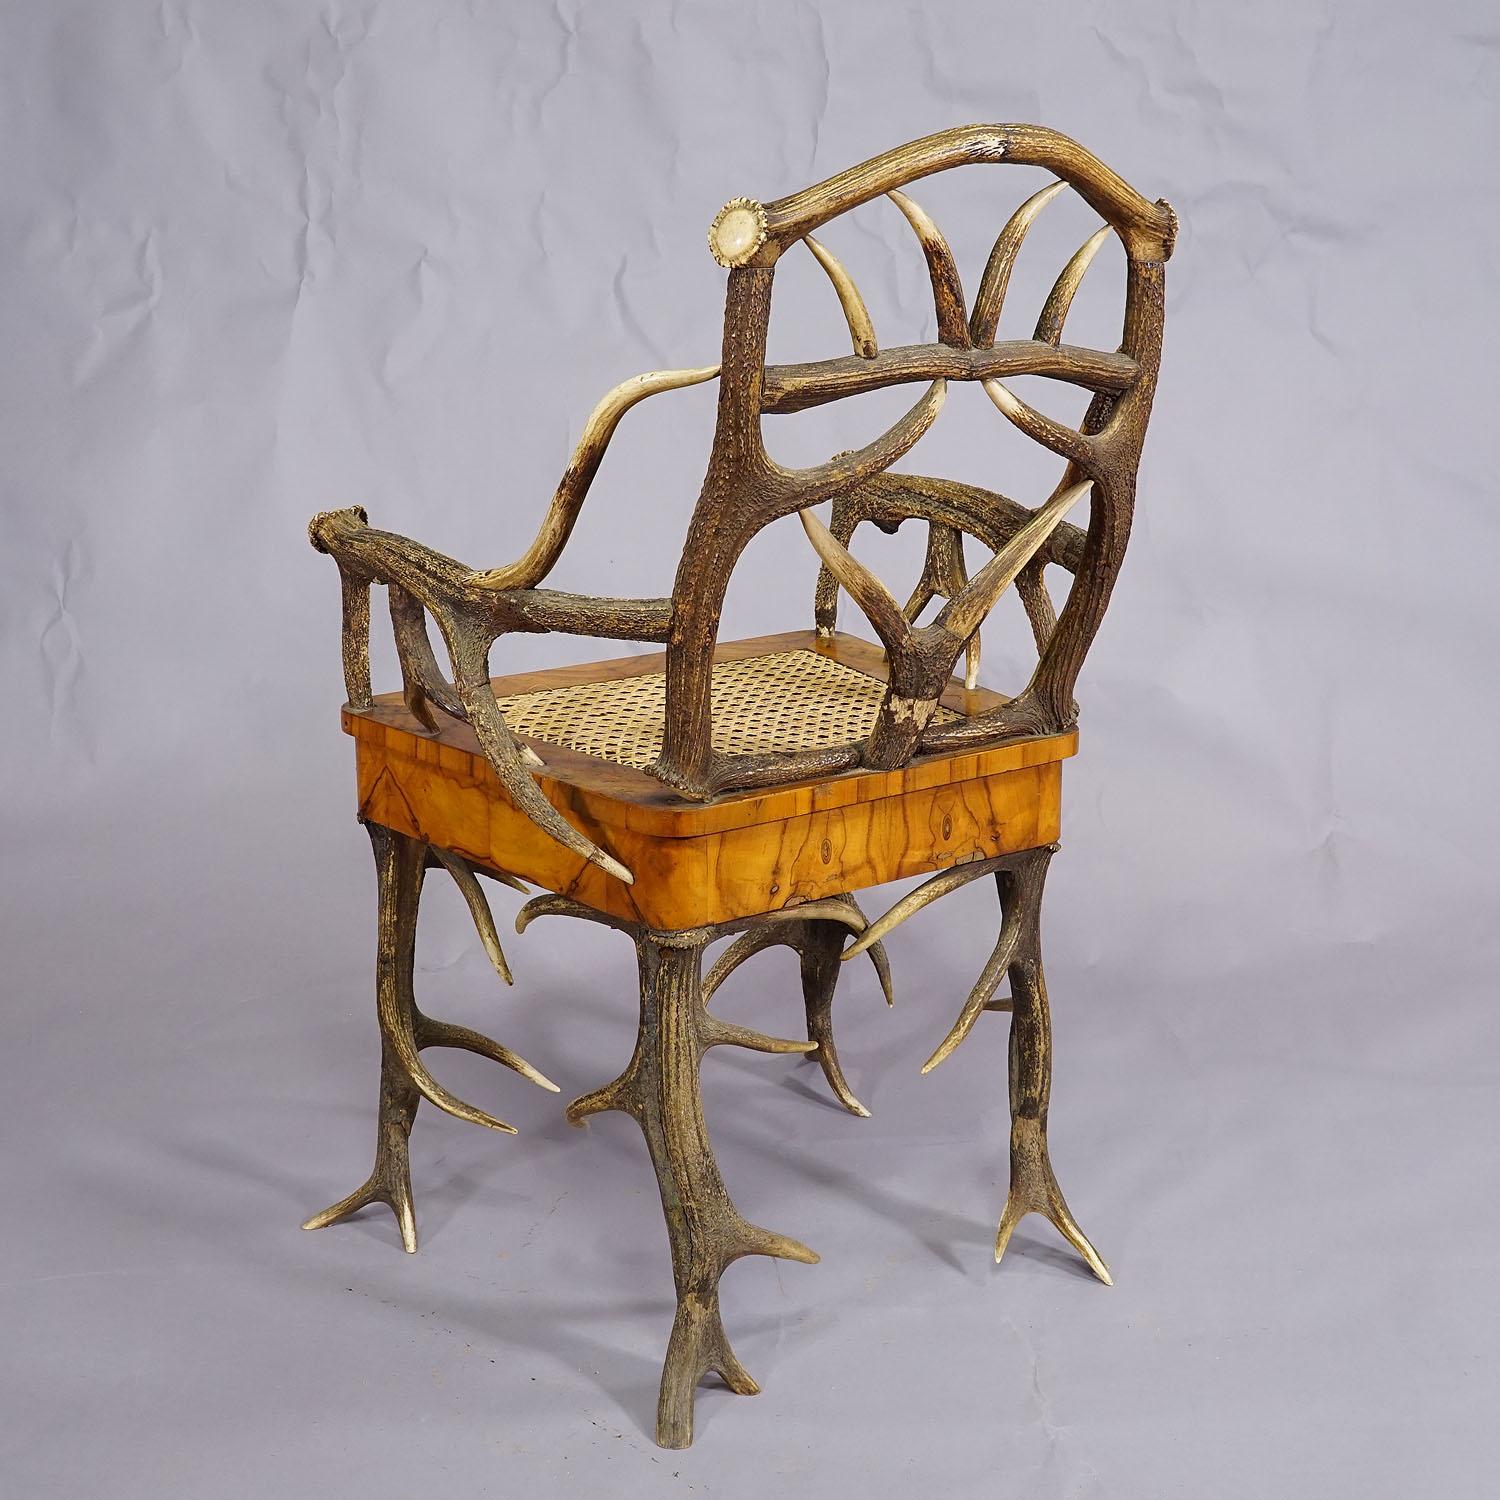 19th Century Black Forest Antler Arm Chair by J. A. K. Horn, Turingen 1840s For Sale